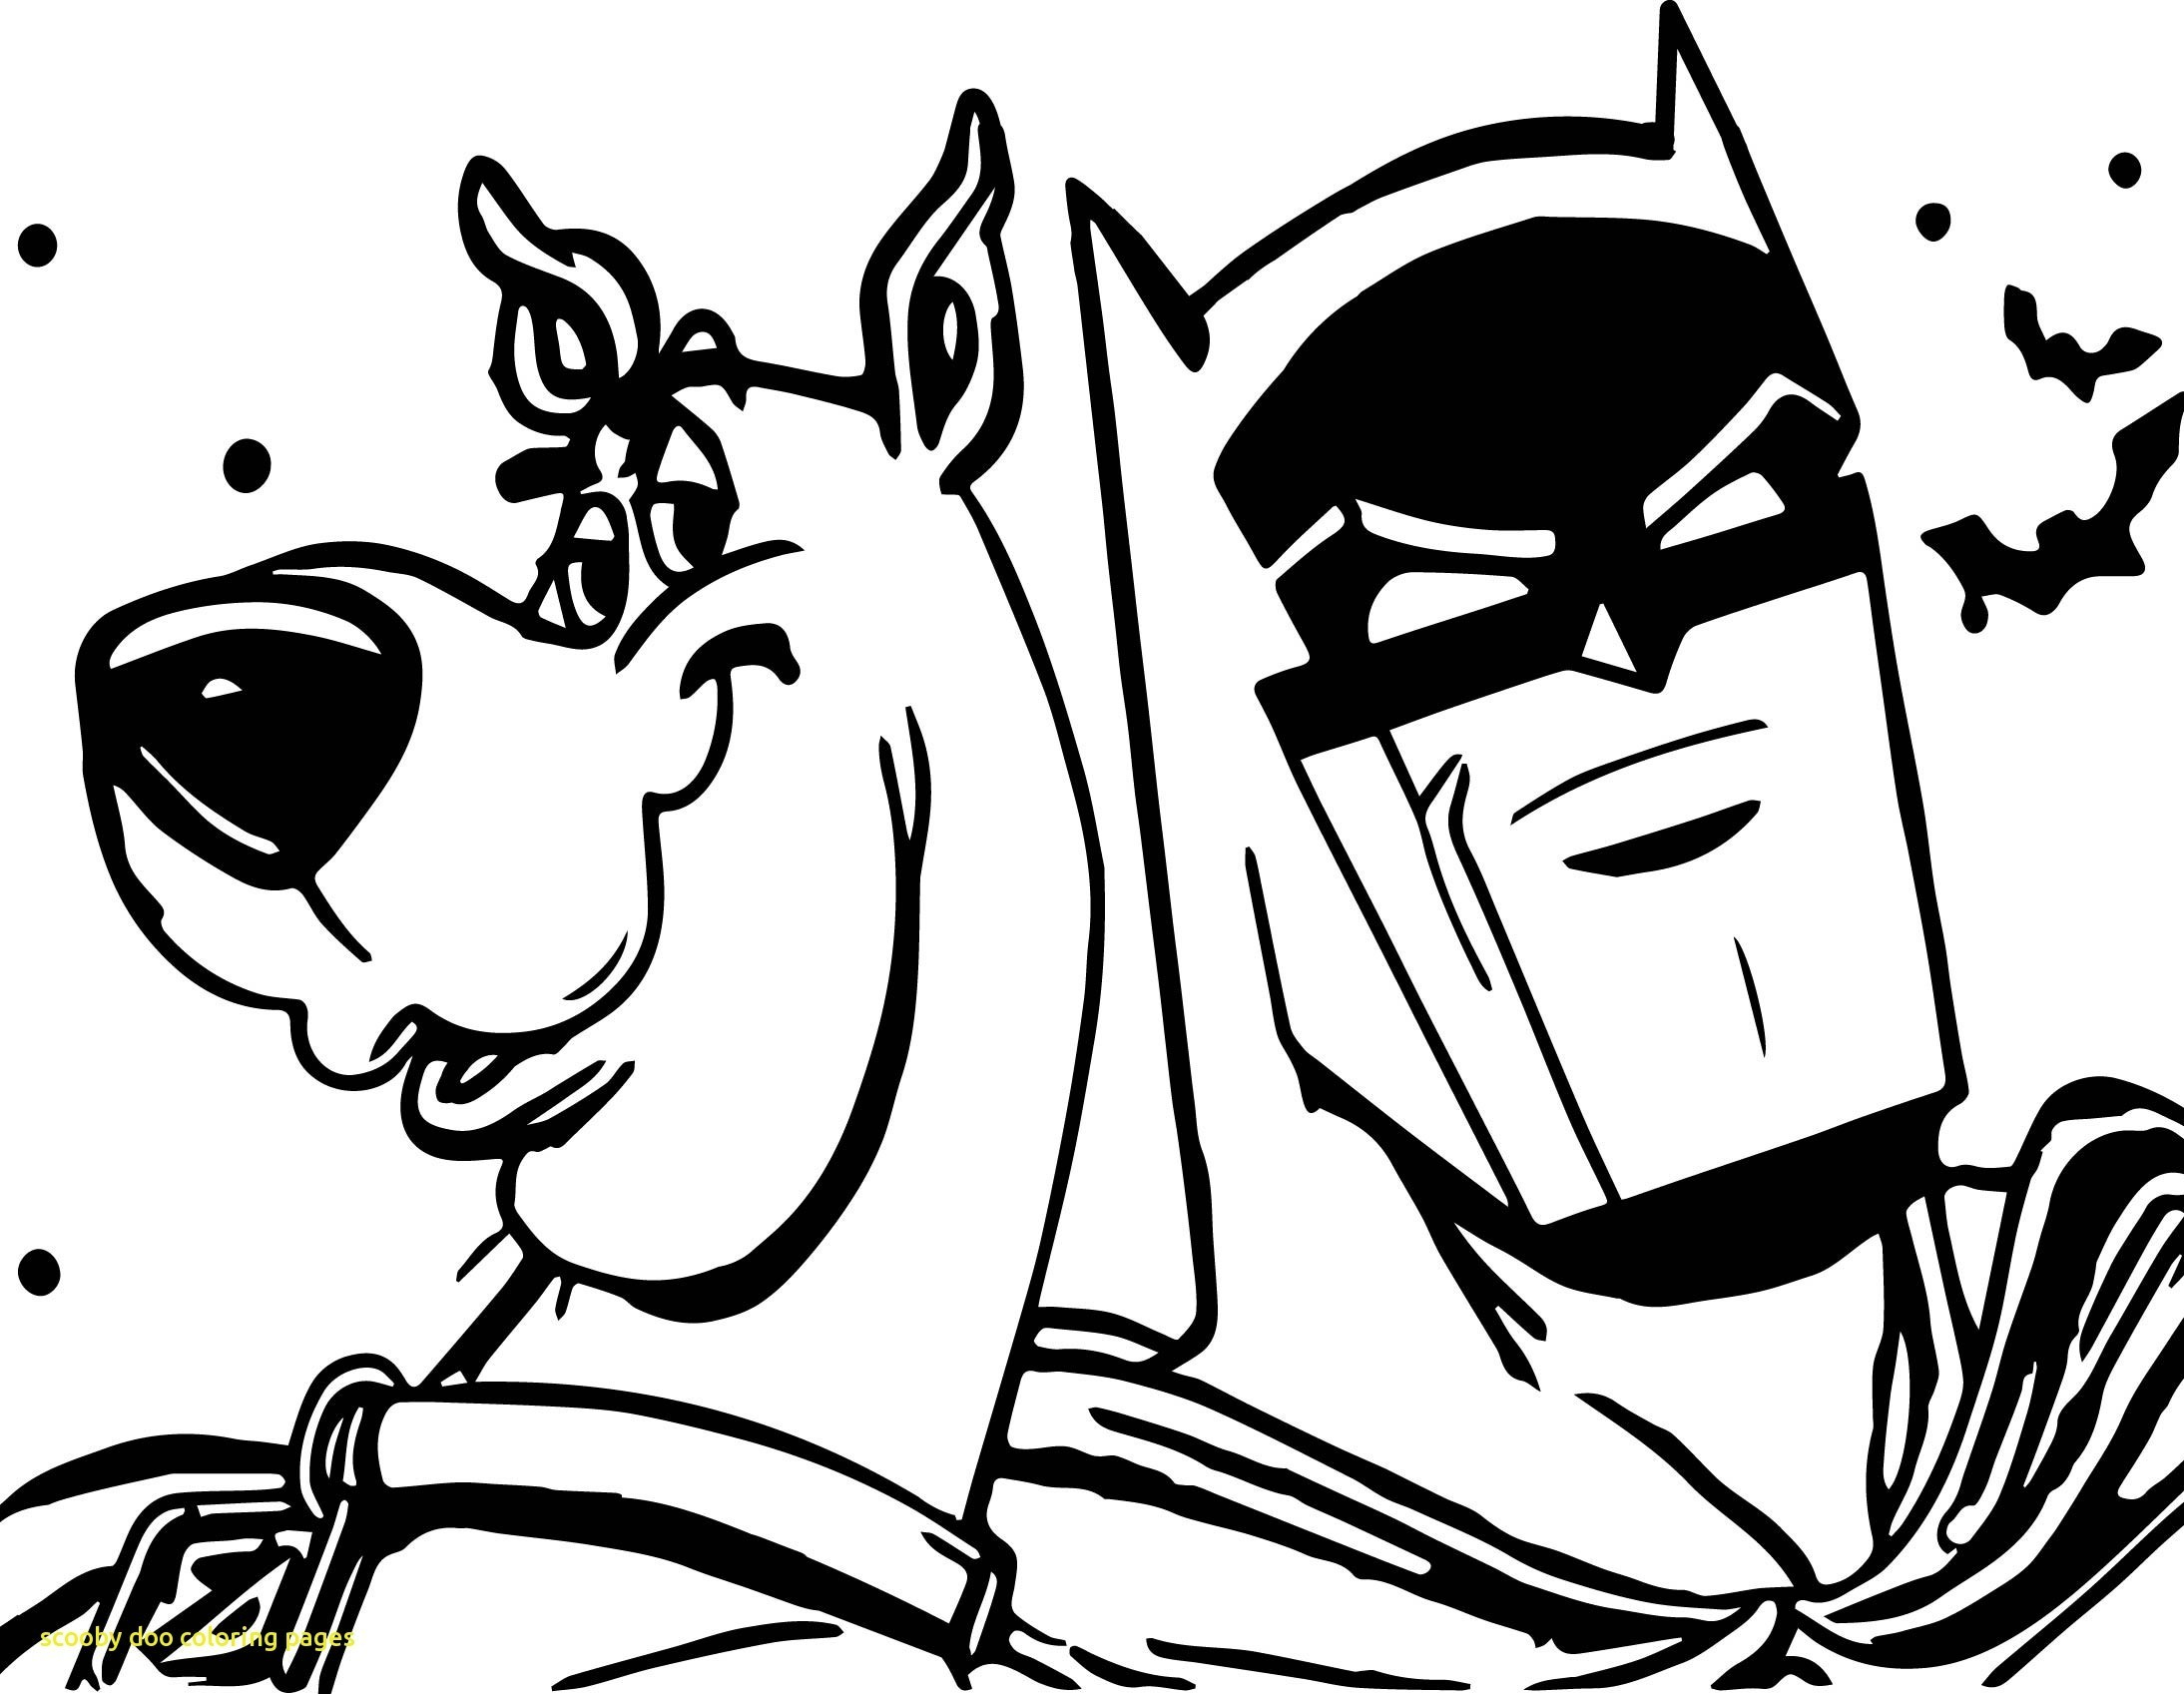 Coloring Ideas : Coloring Ideas Scooby Doo Pages Free Lovely Simple - Free Printable Coloring Pages Scooby Doo